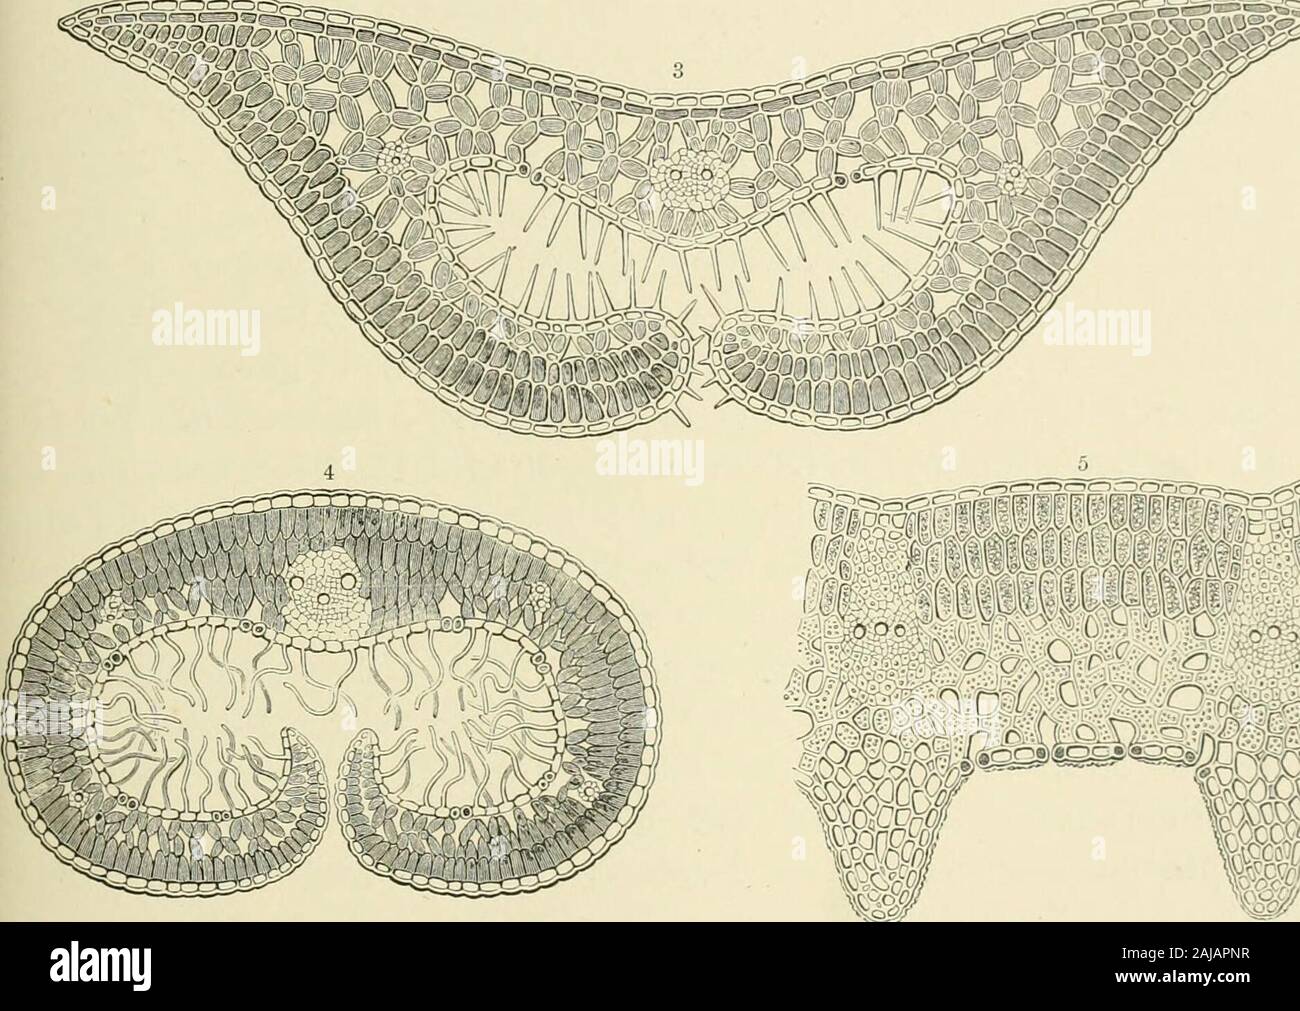 The natural history of plants, their forms, growth, reproduction, and distribution; . s &lt;?41p. ?;3^8y*^*^**^ferP.W r . I o. A Fig. 71.—Transverse Sections through Rolled Leaves. Erica caffra; x280. ^ Empetrum nigrum; xl60. » Andromeda tetragona; xl50. * Tylanthus ericoides; xl30.« Salix reticulata; x 200. Stock Photo